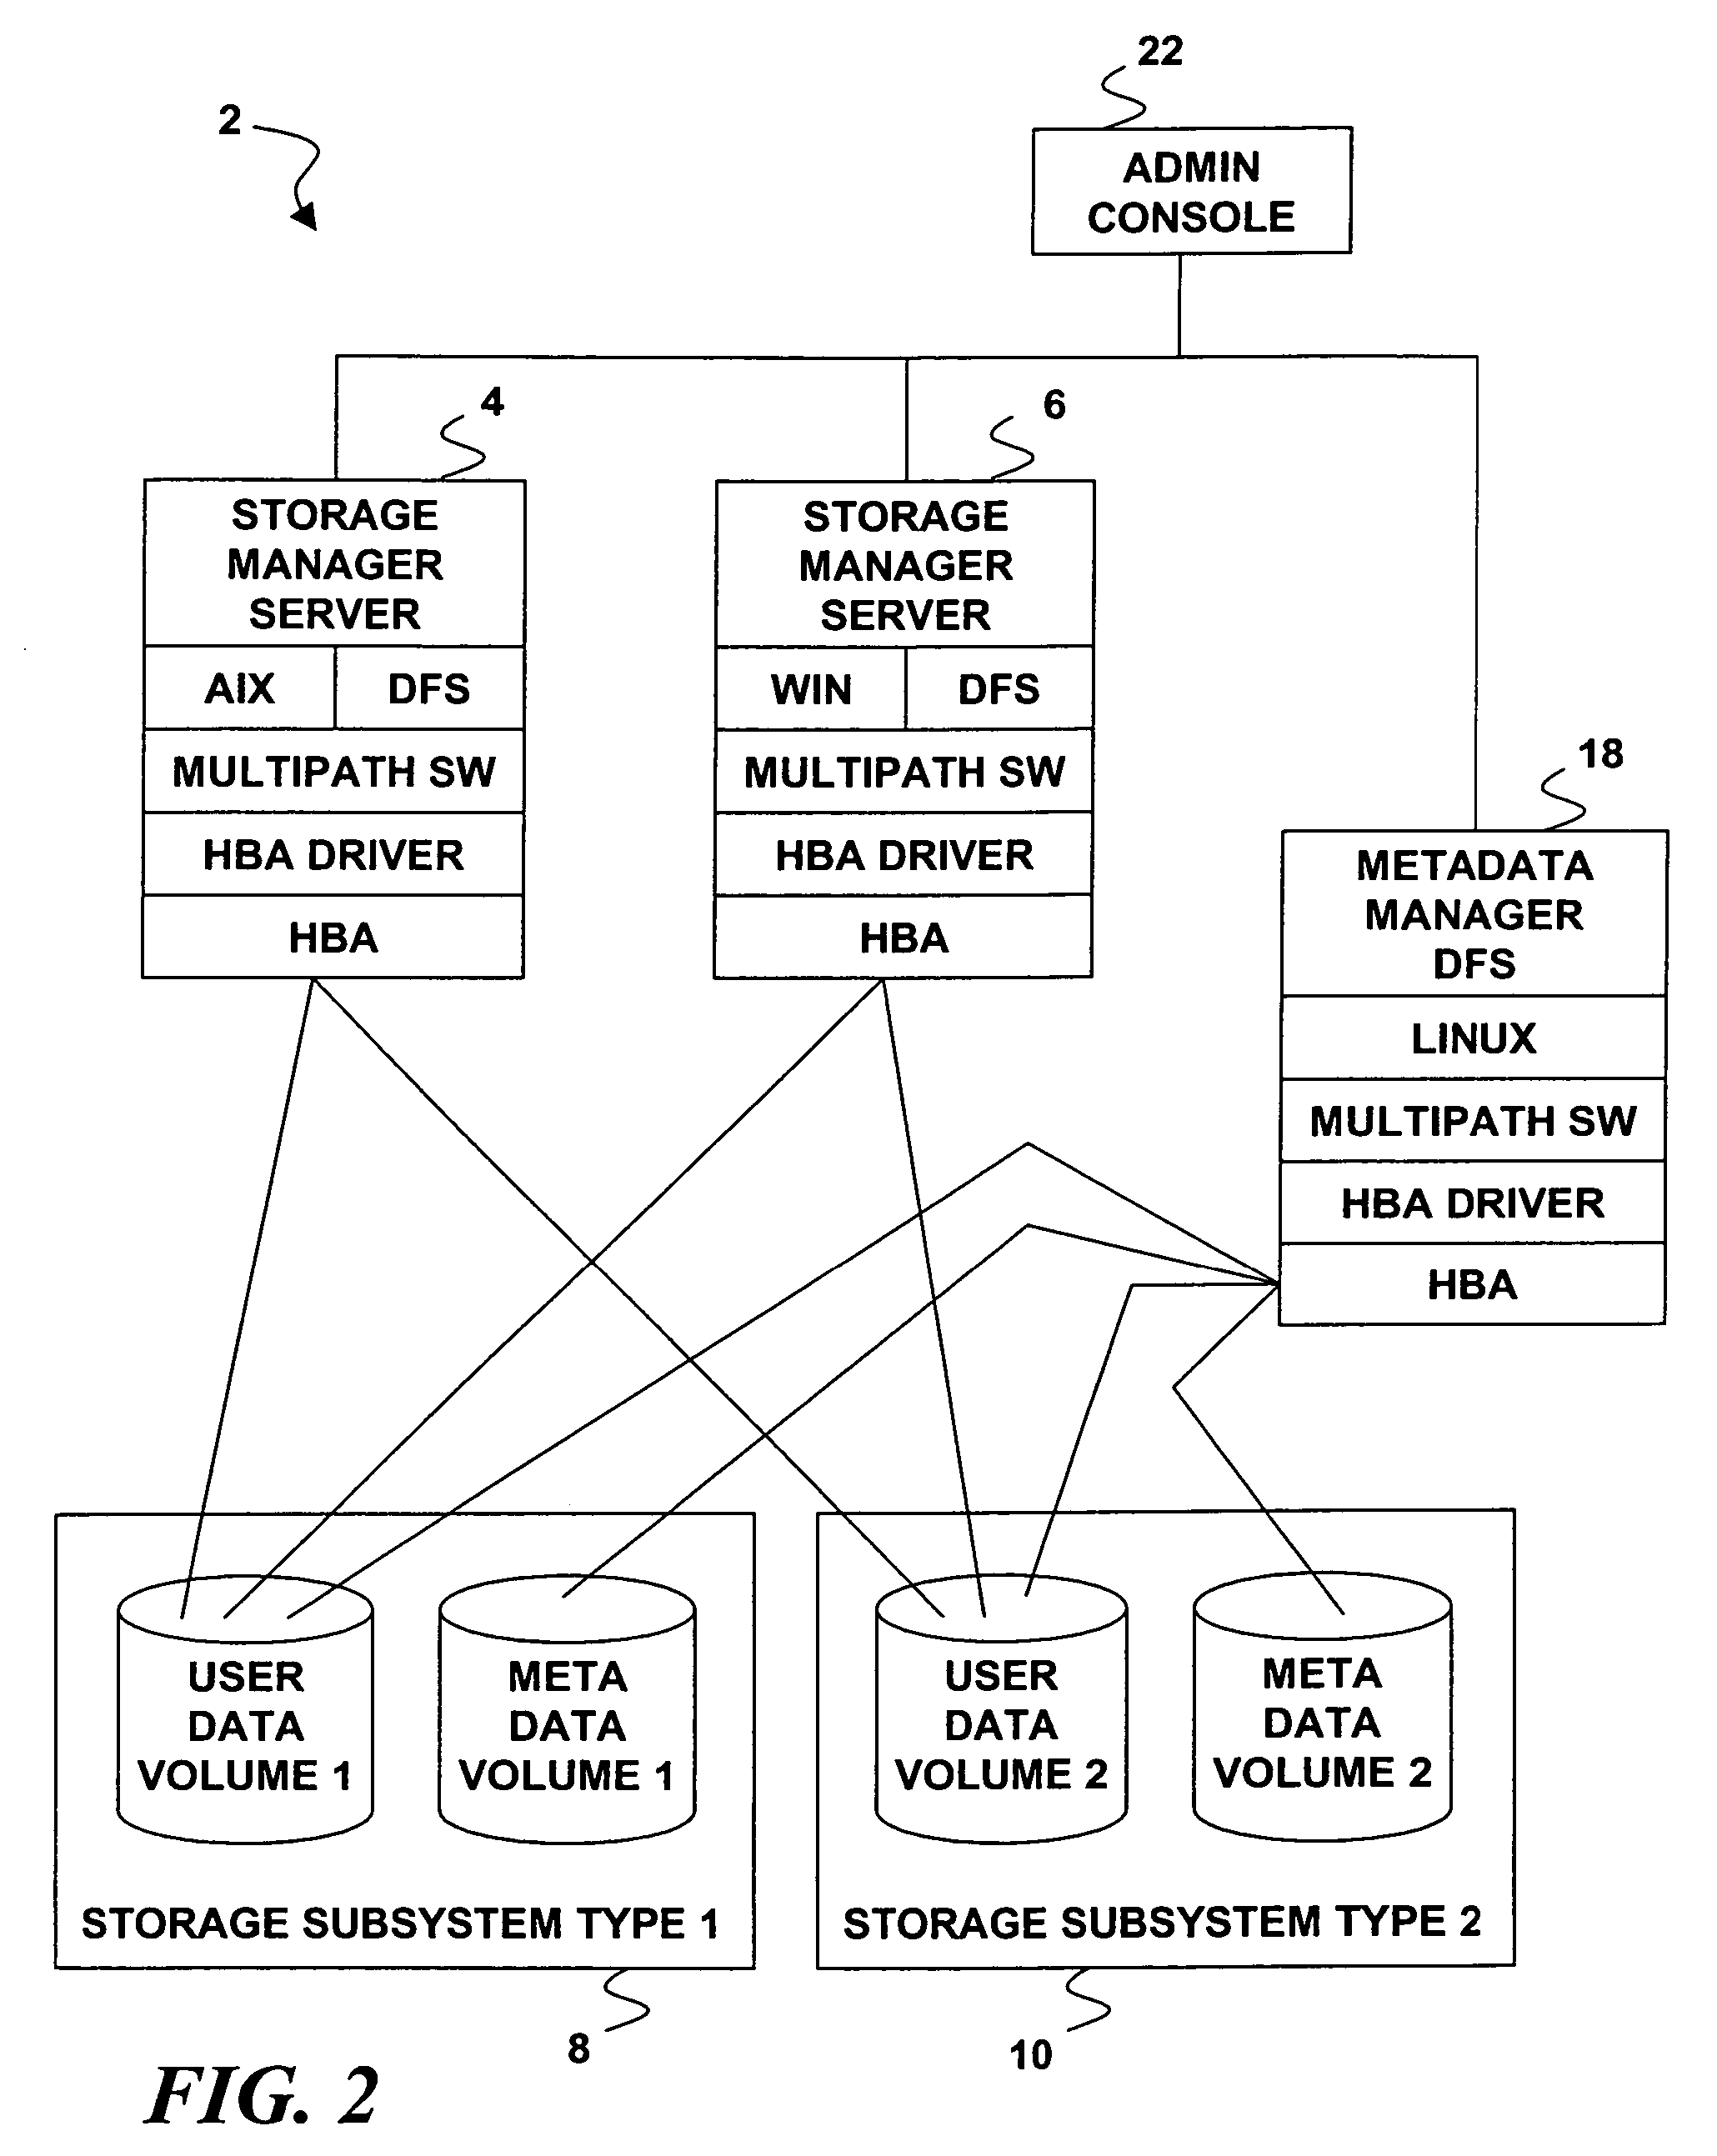 File system architecture requiring no direct access to user data from a metadata manager